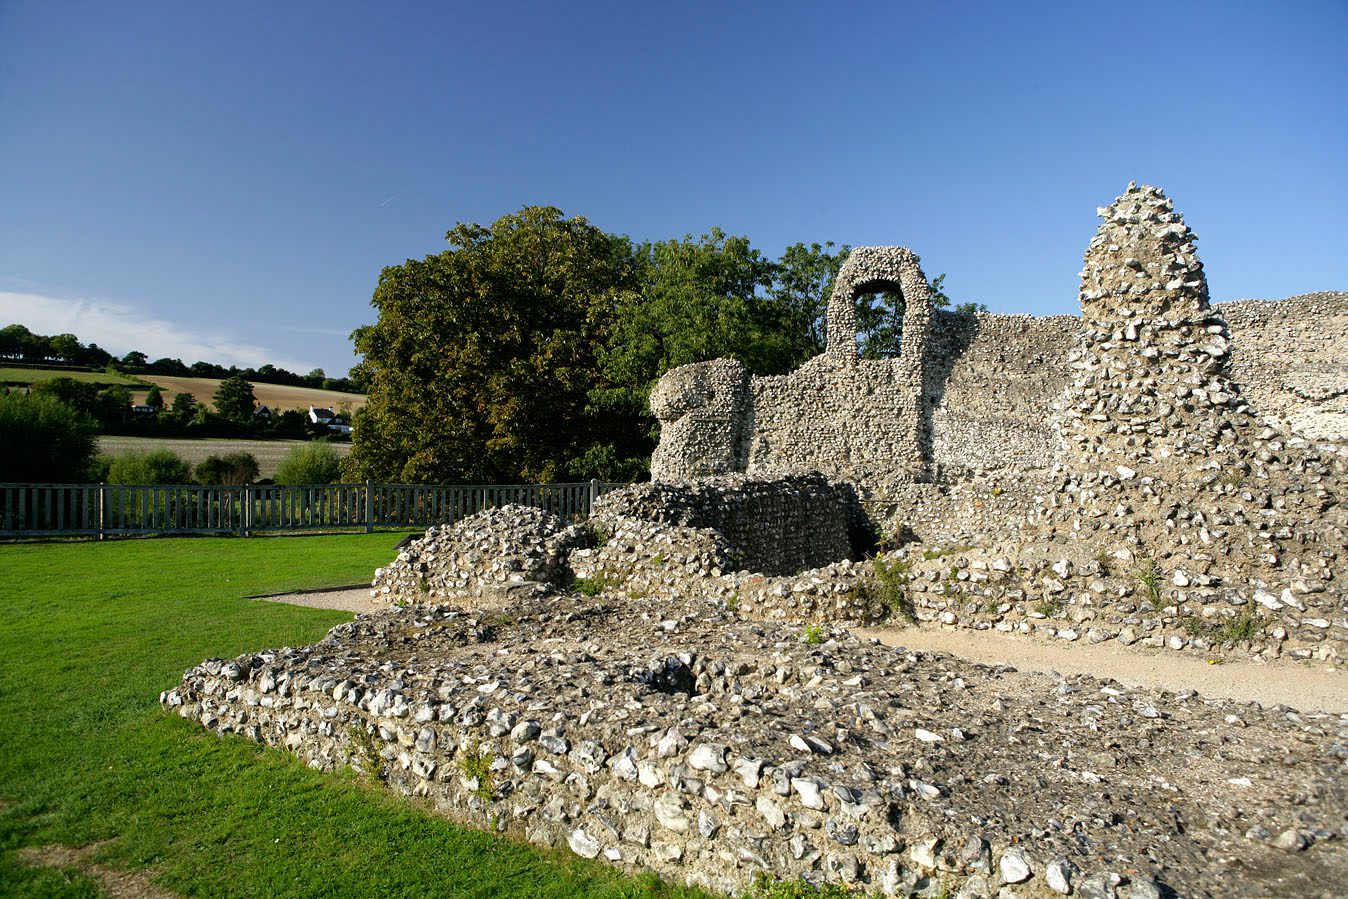 Castle ruins at Eynsford, with grass and trees in view.